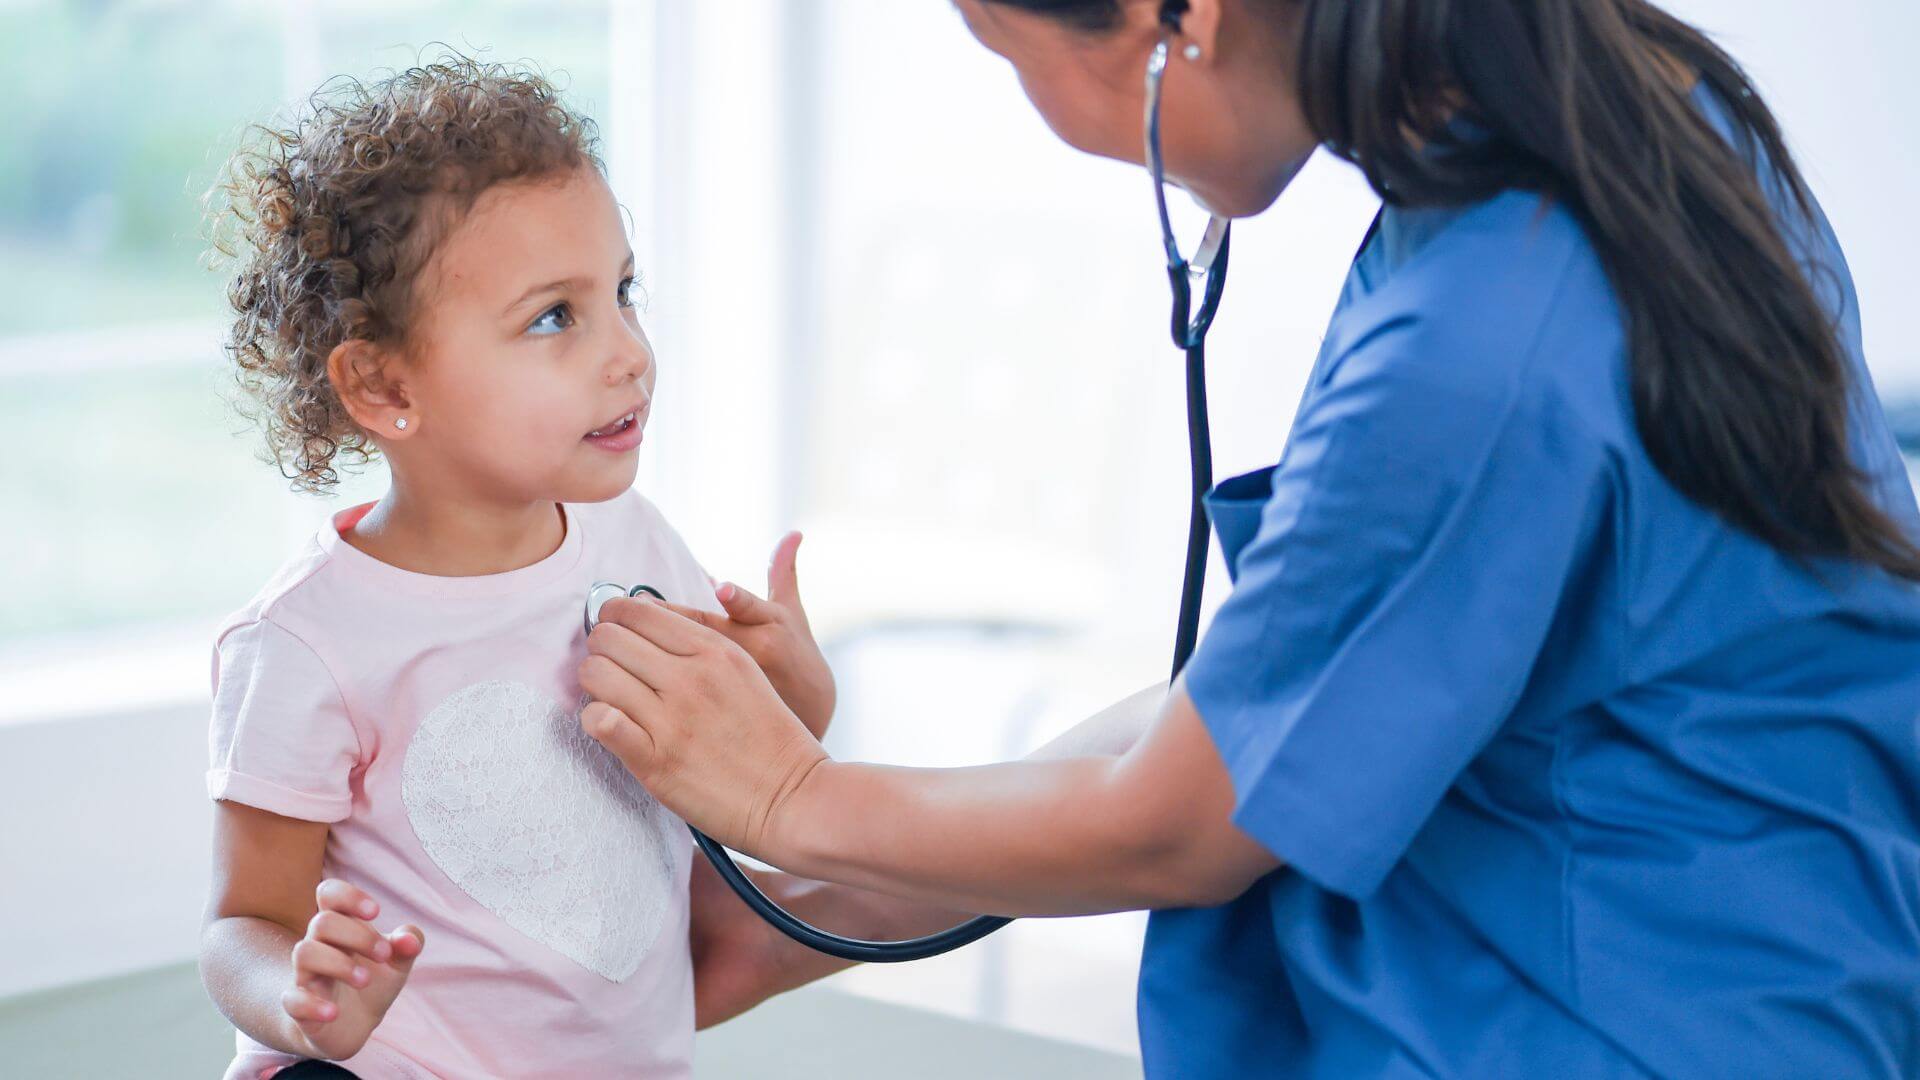 Routine Check-Ups in Children's Well-Being